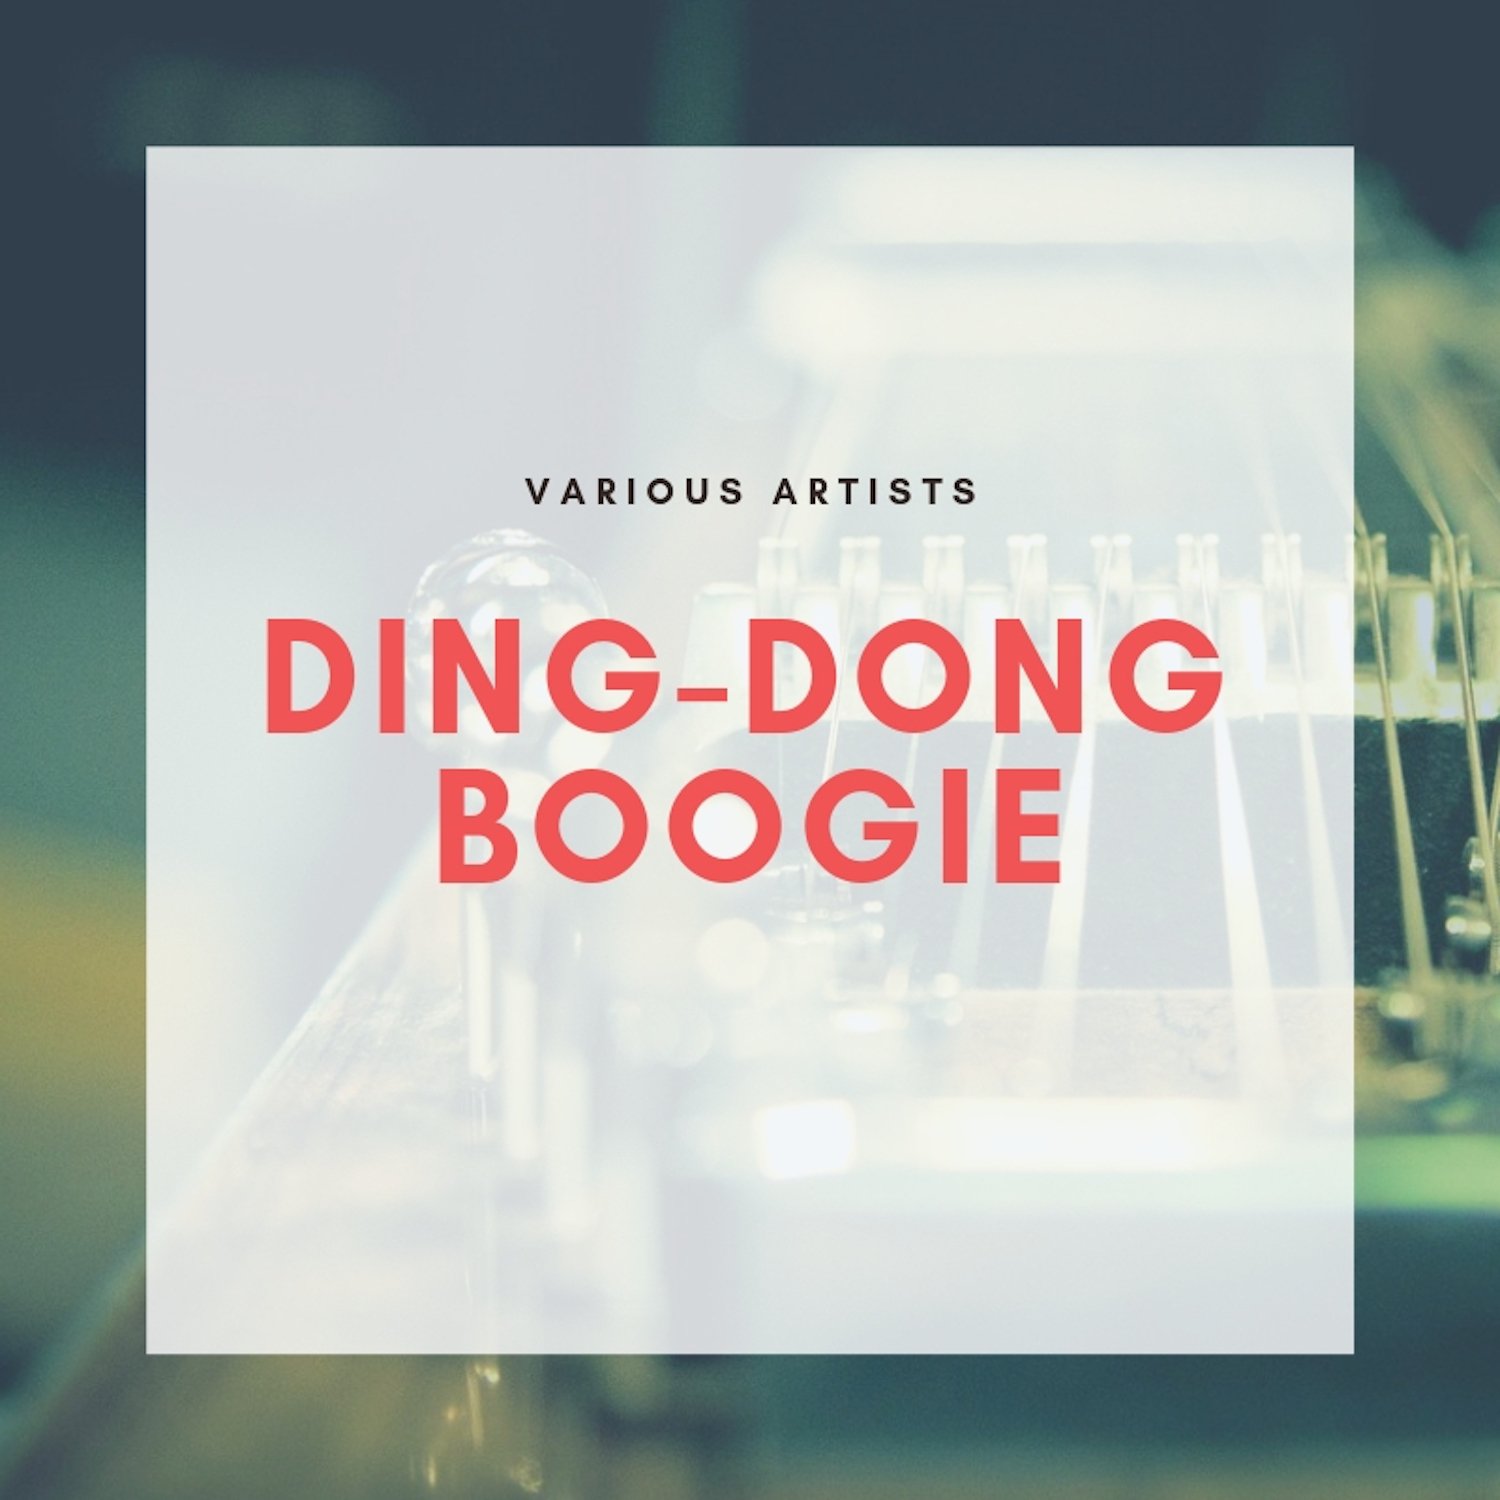 Ding-Dong Boogie